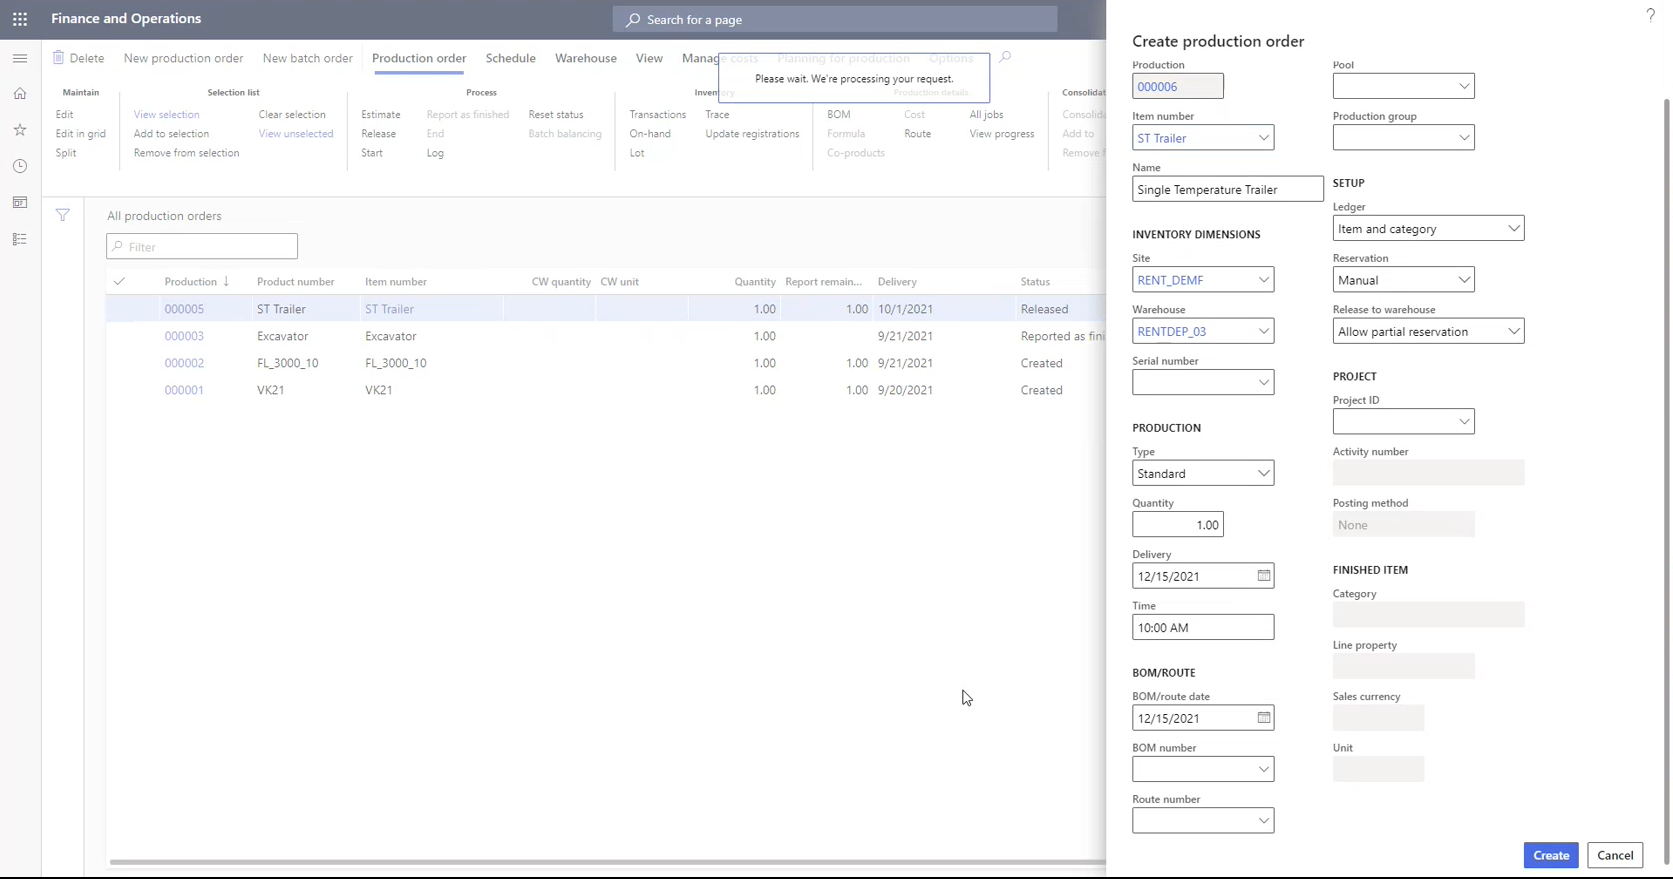 To-Increase's DynaRent solution screenshot showing the production order.